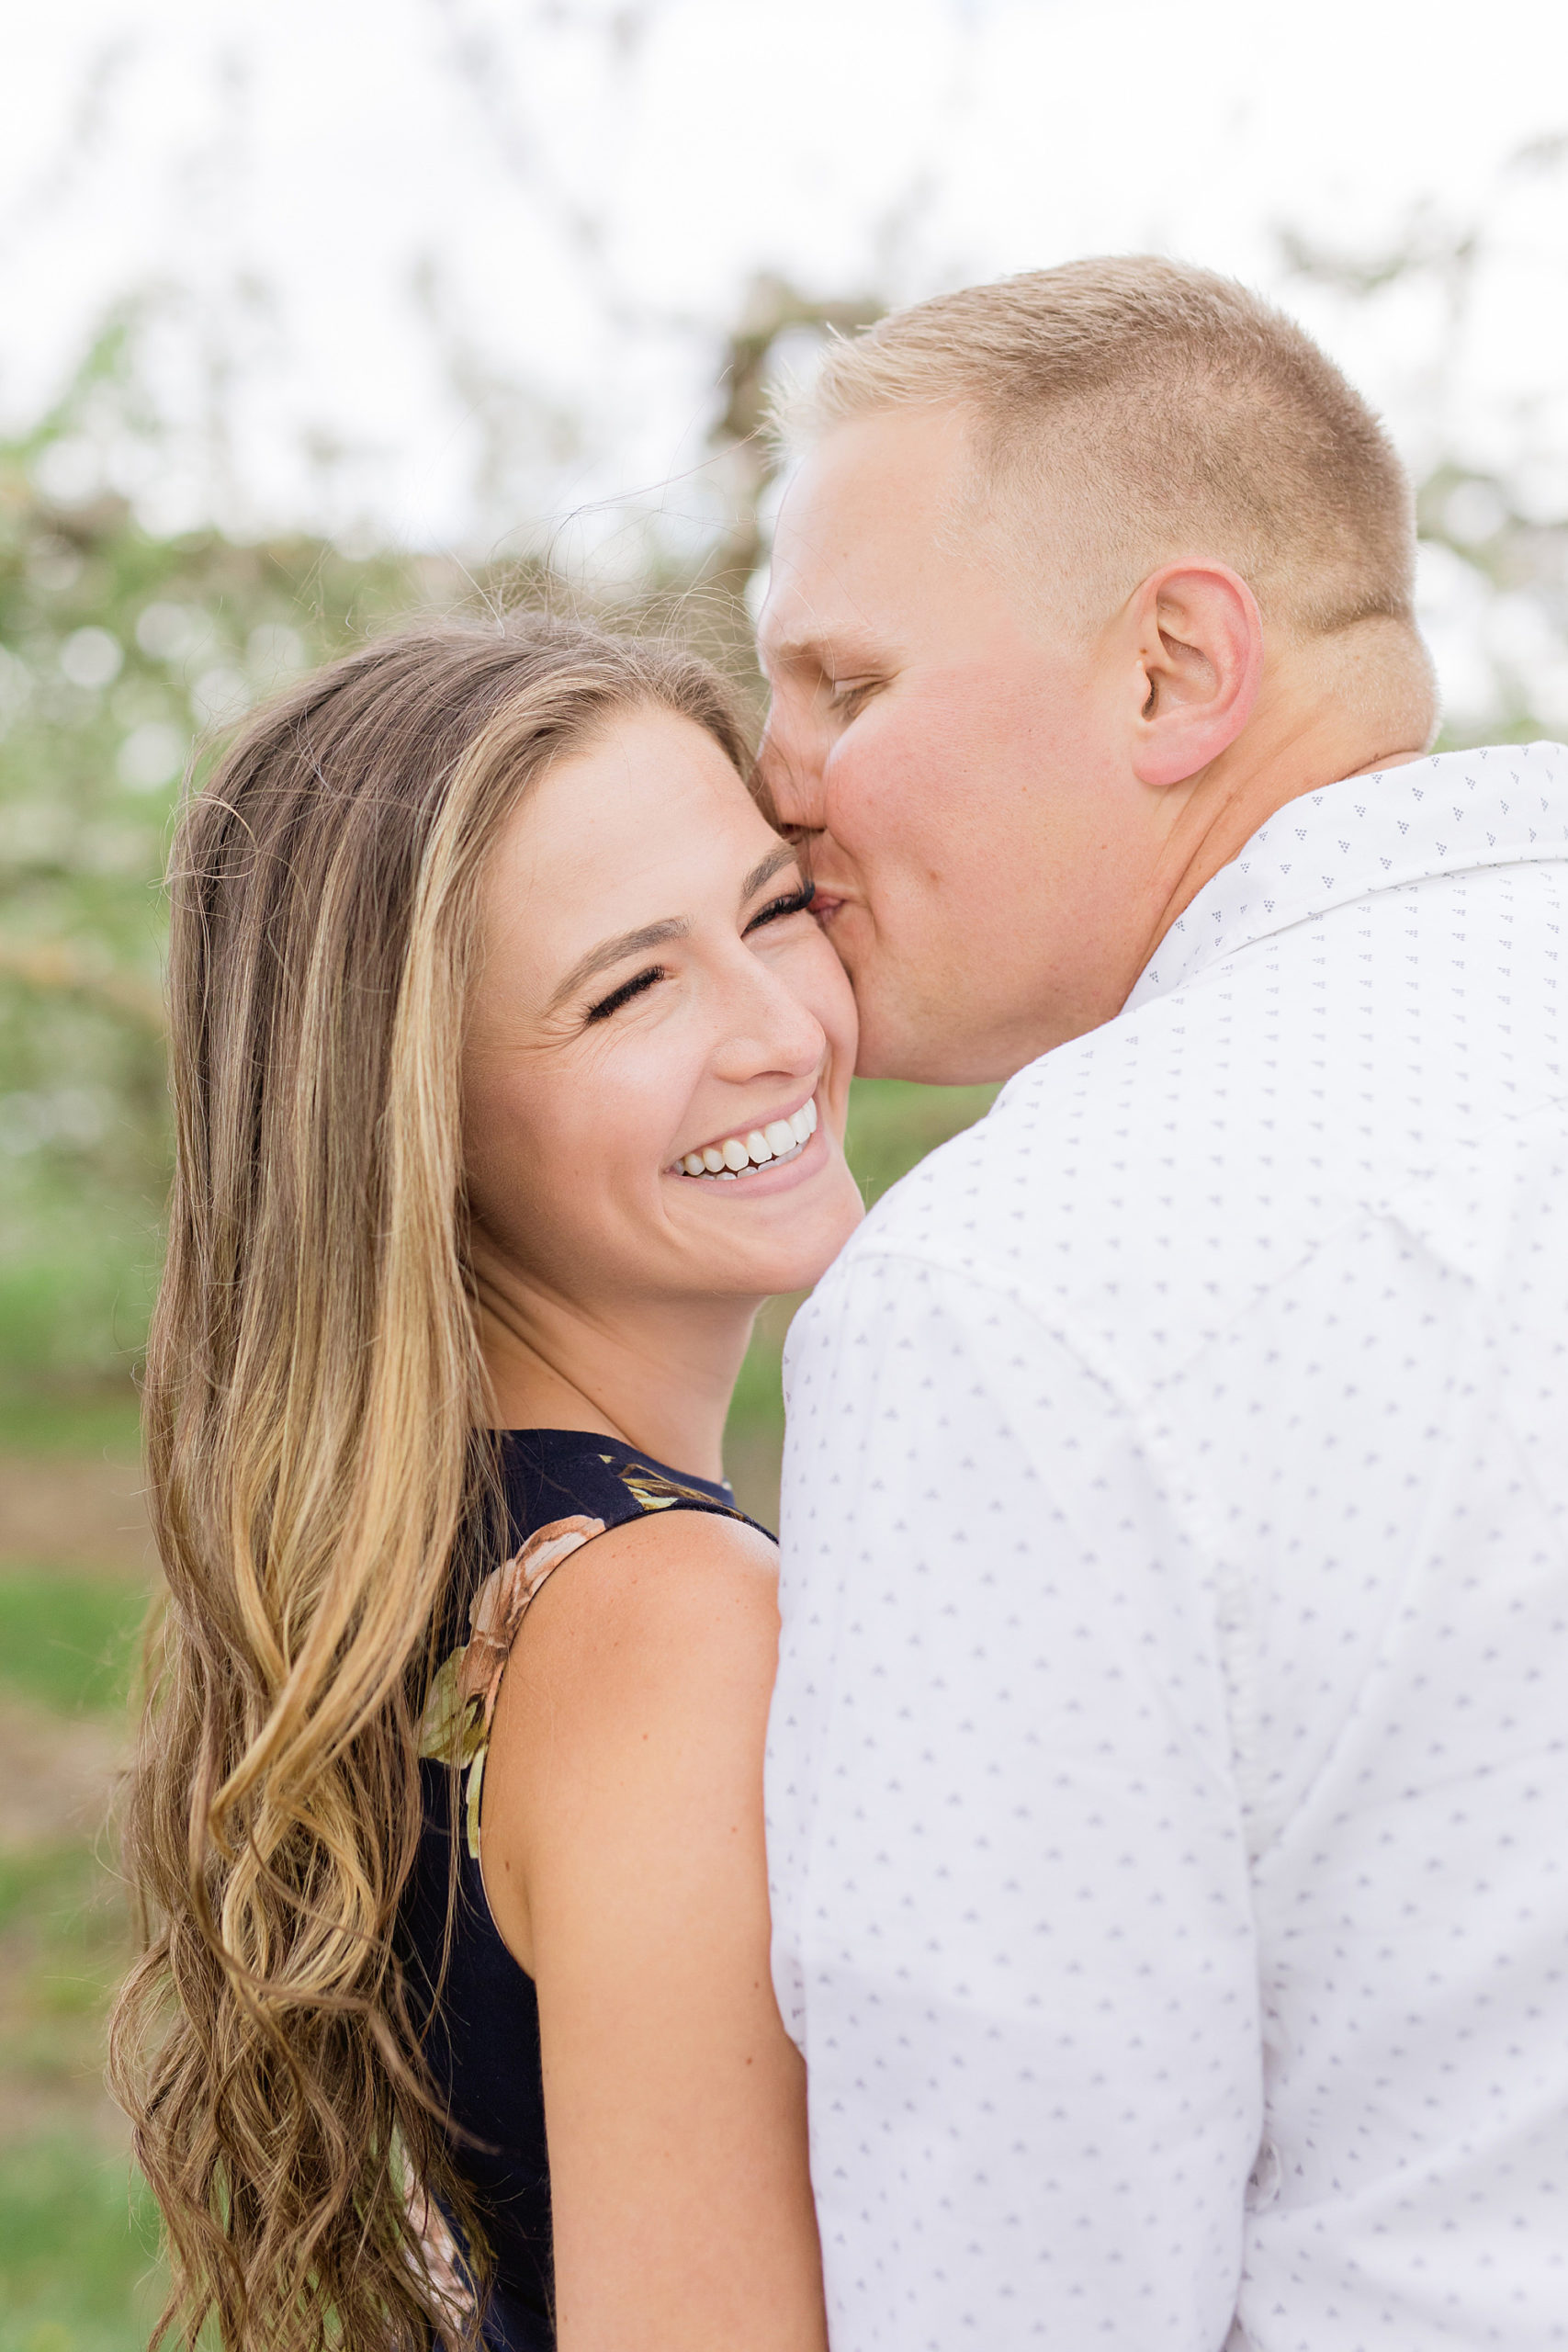 A classic Michigan Spring apple blossom engagement session at Blake’s Orchard by Breanne Rochelle Photography.